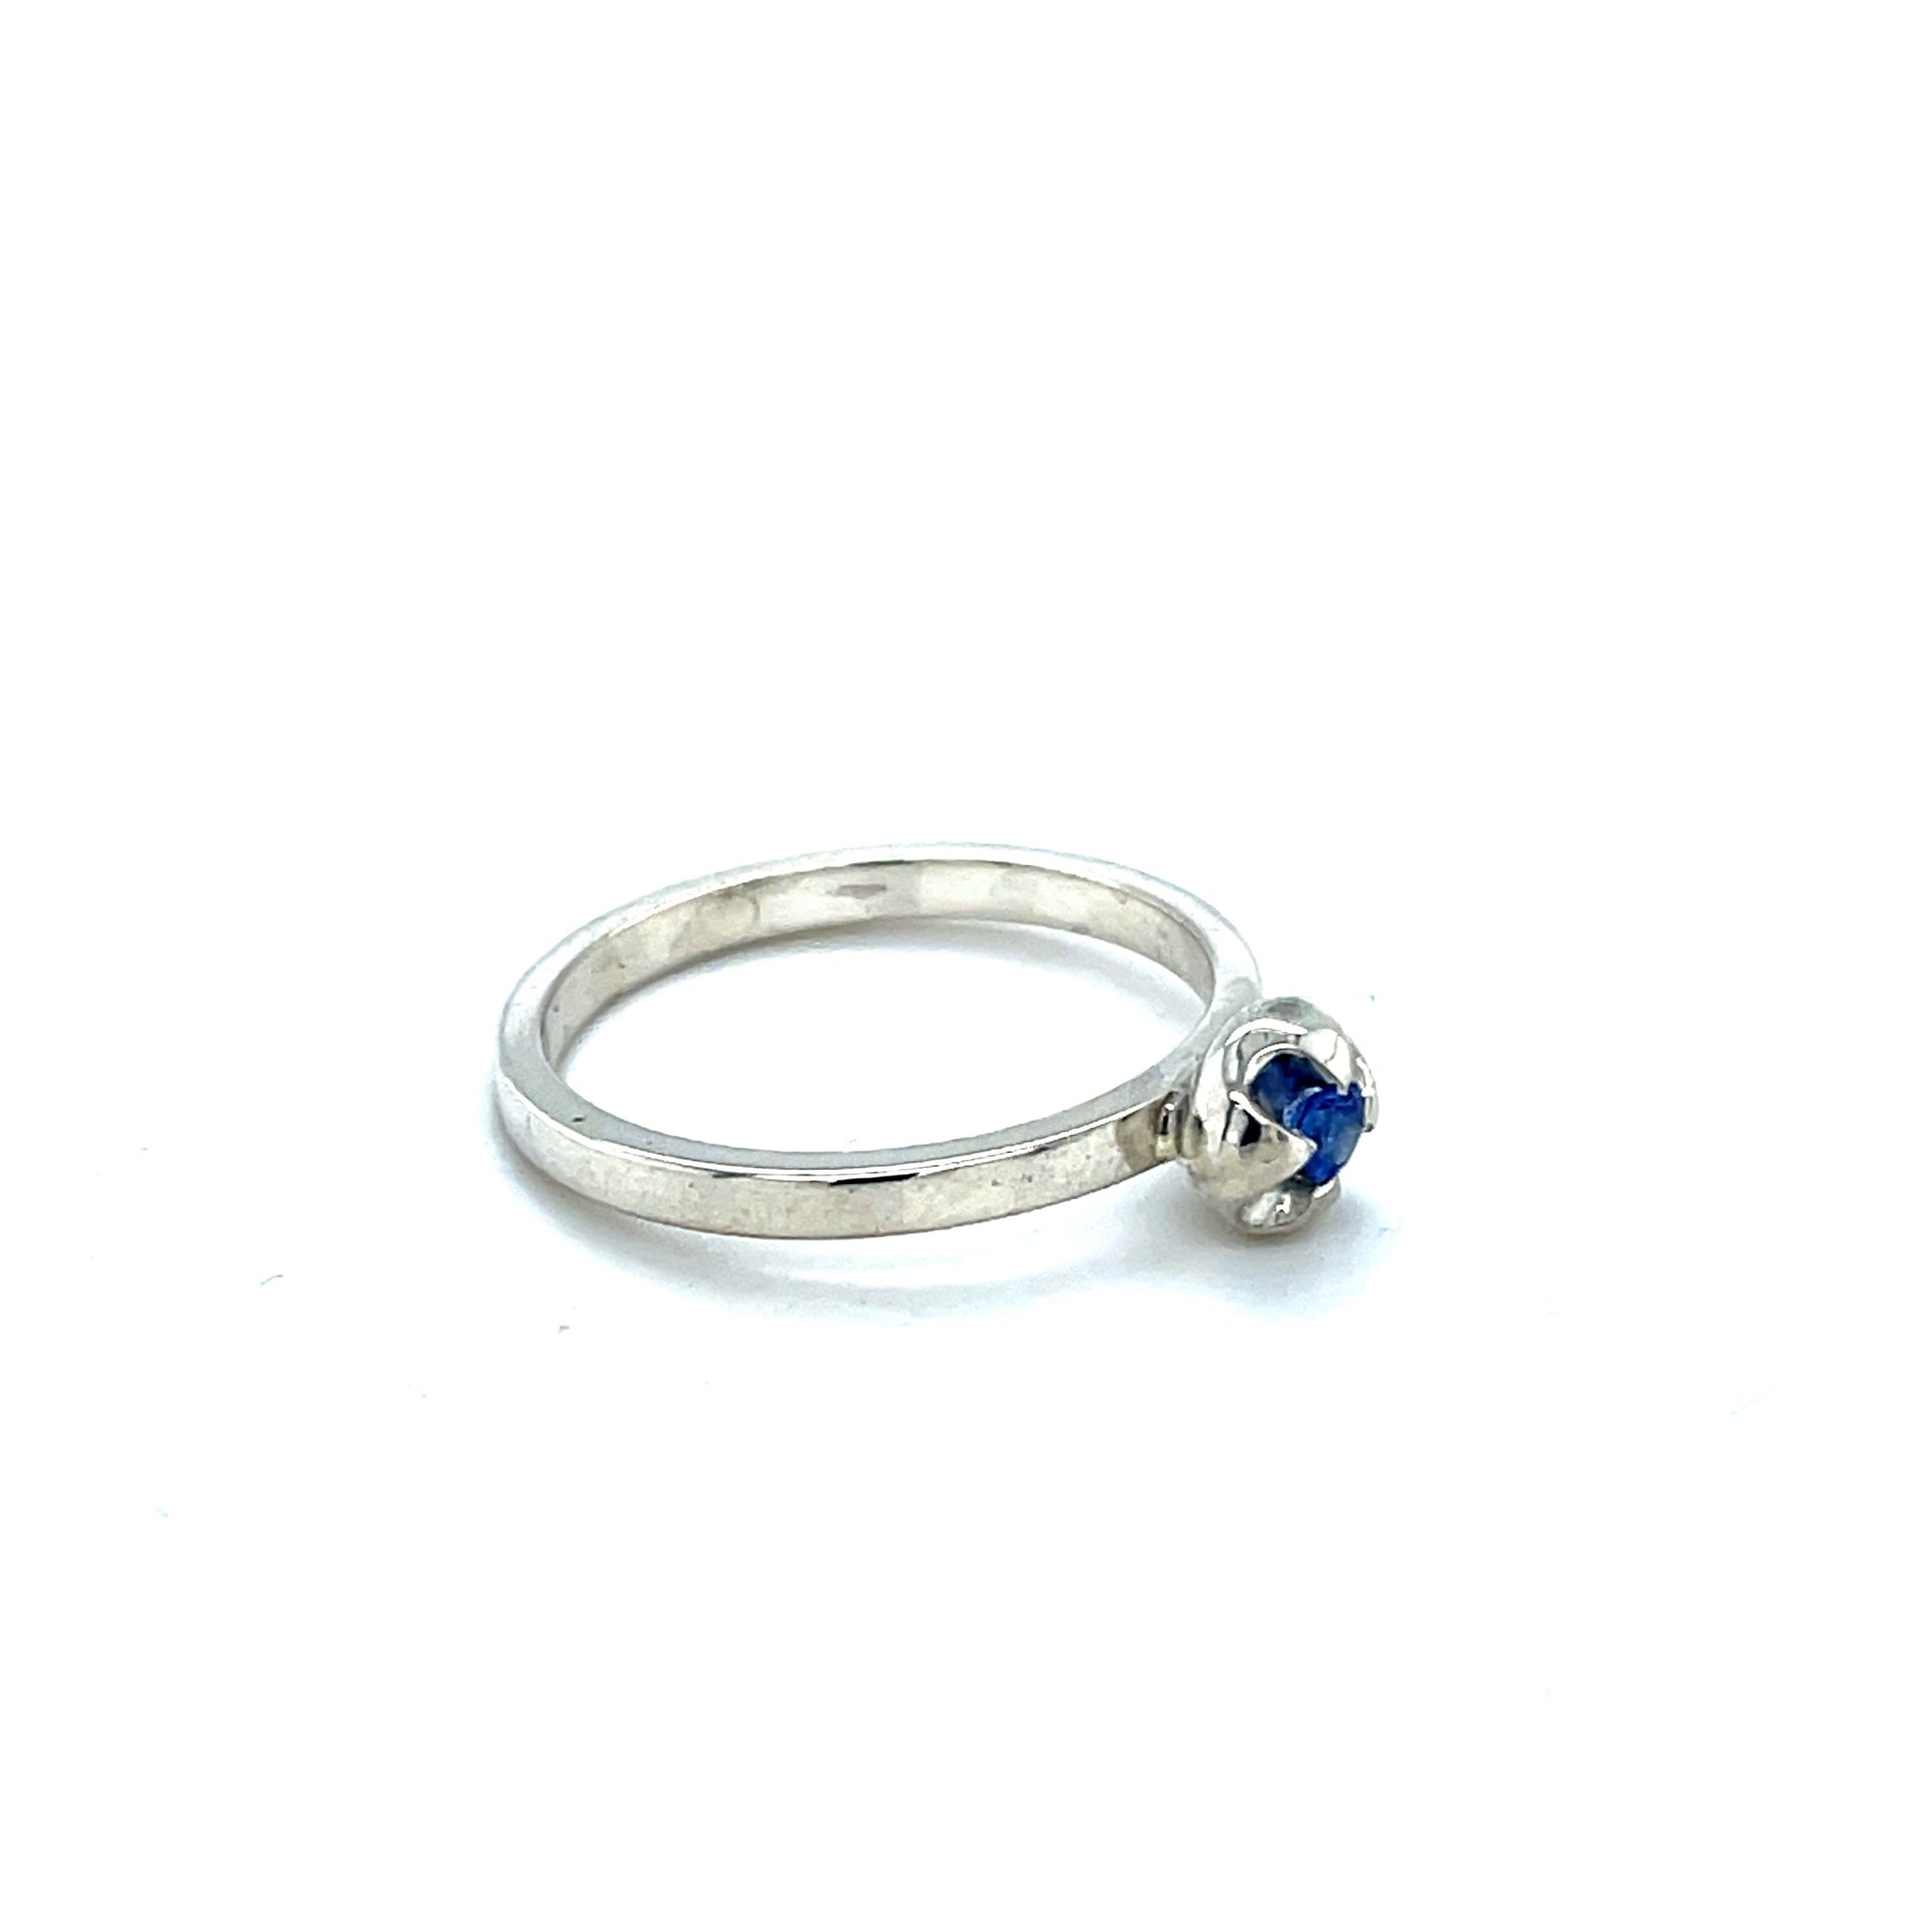 Quatrefoil Silver Ring with Sapphire